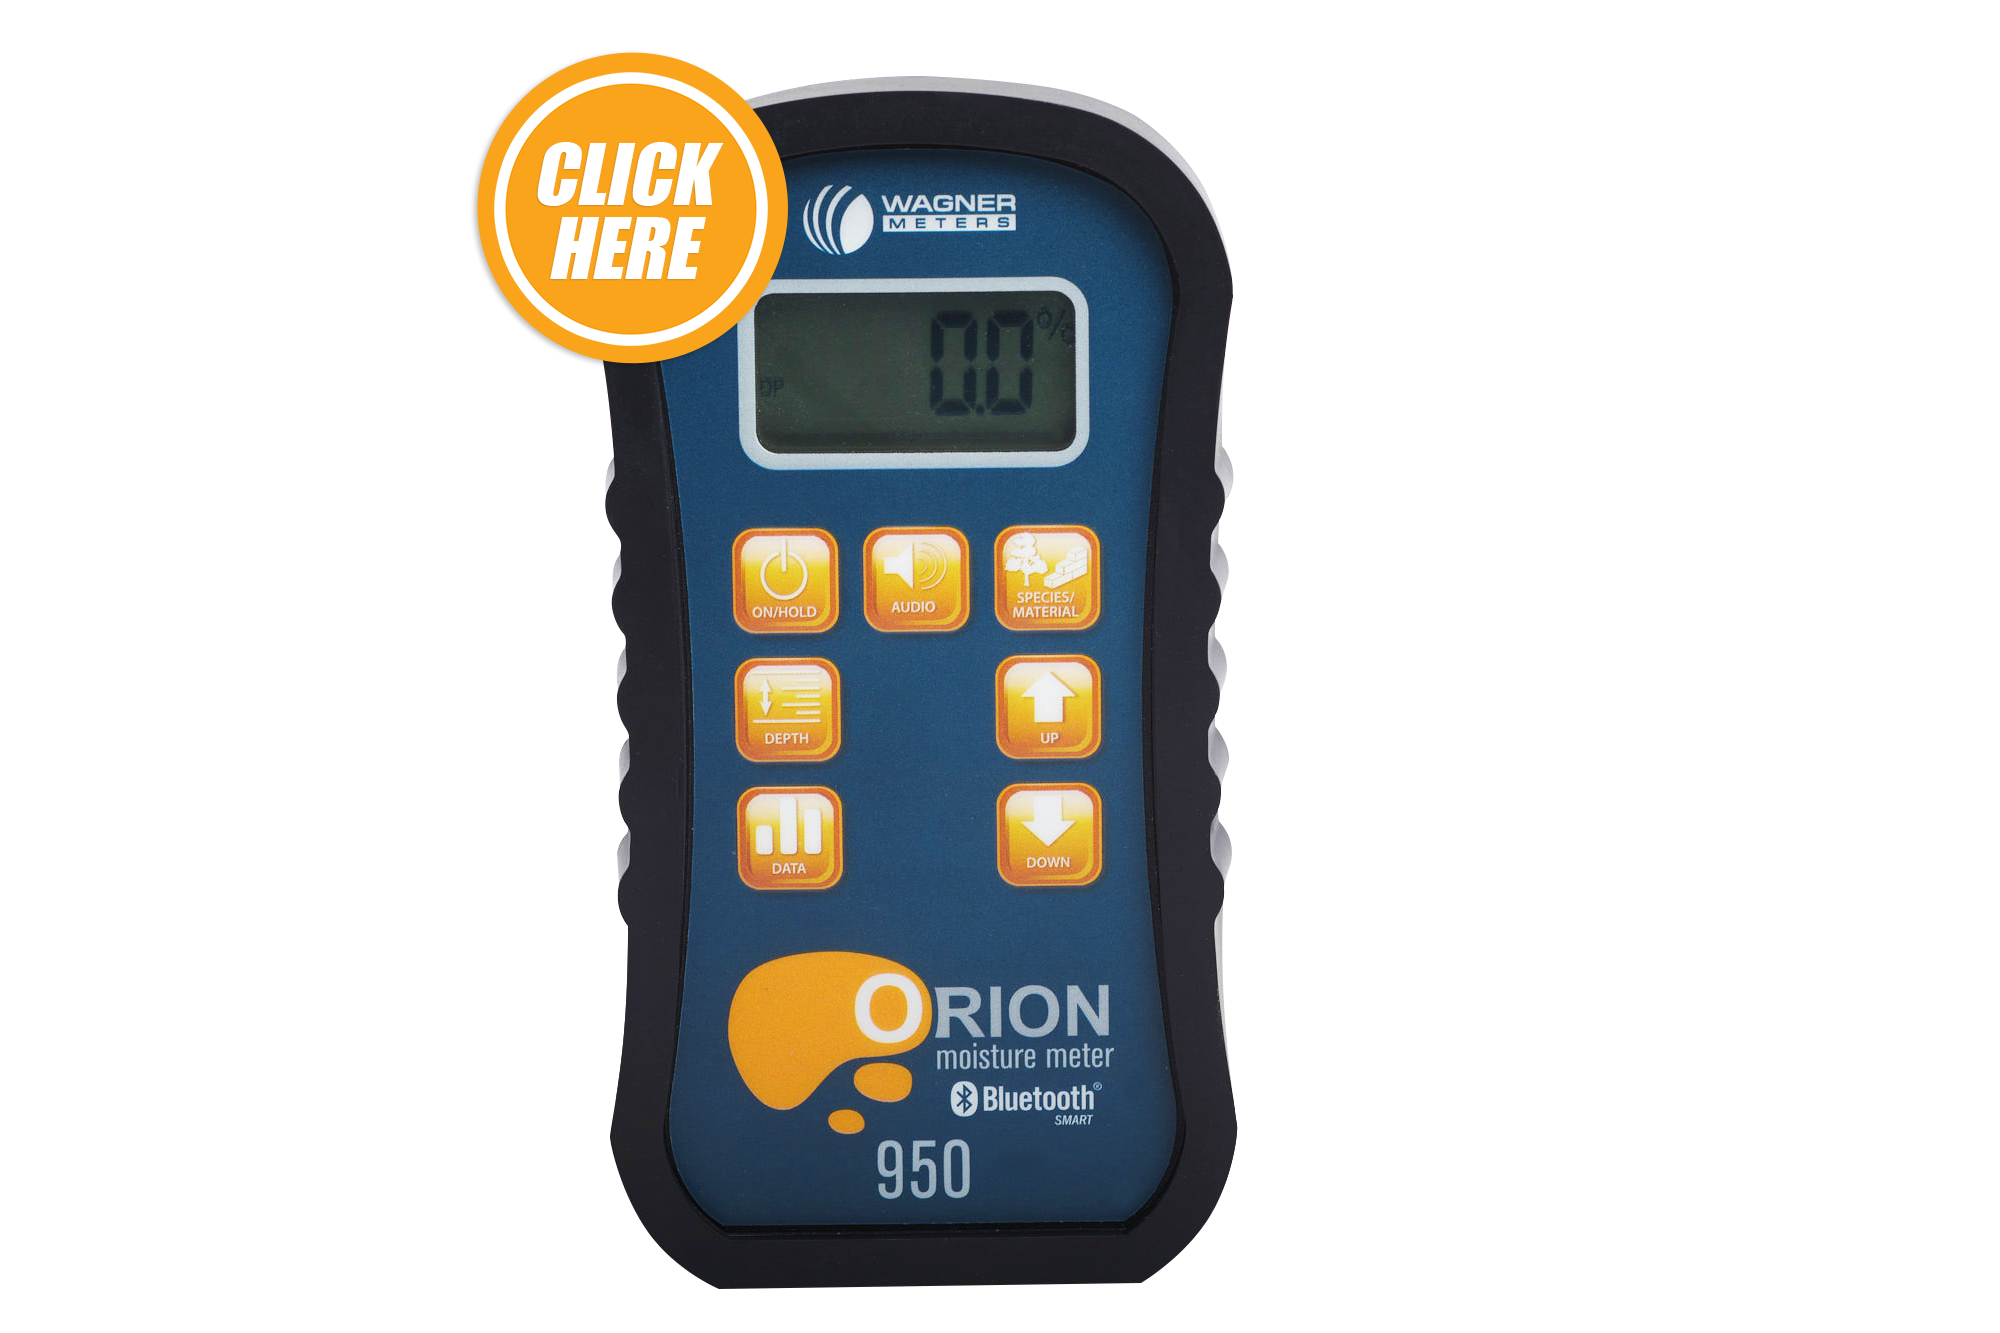 Click here to purchase an Orion 950 moisture meter